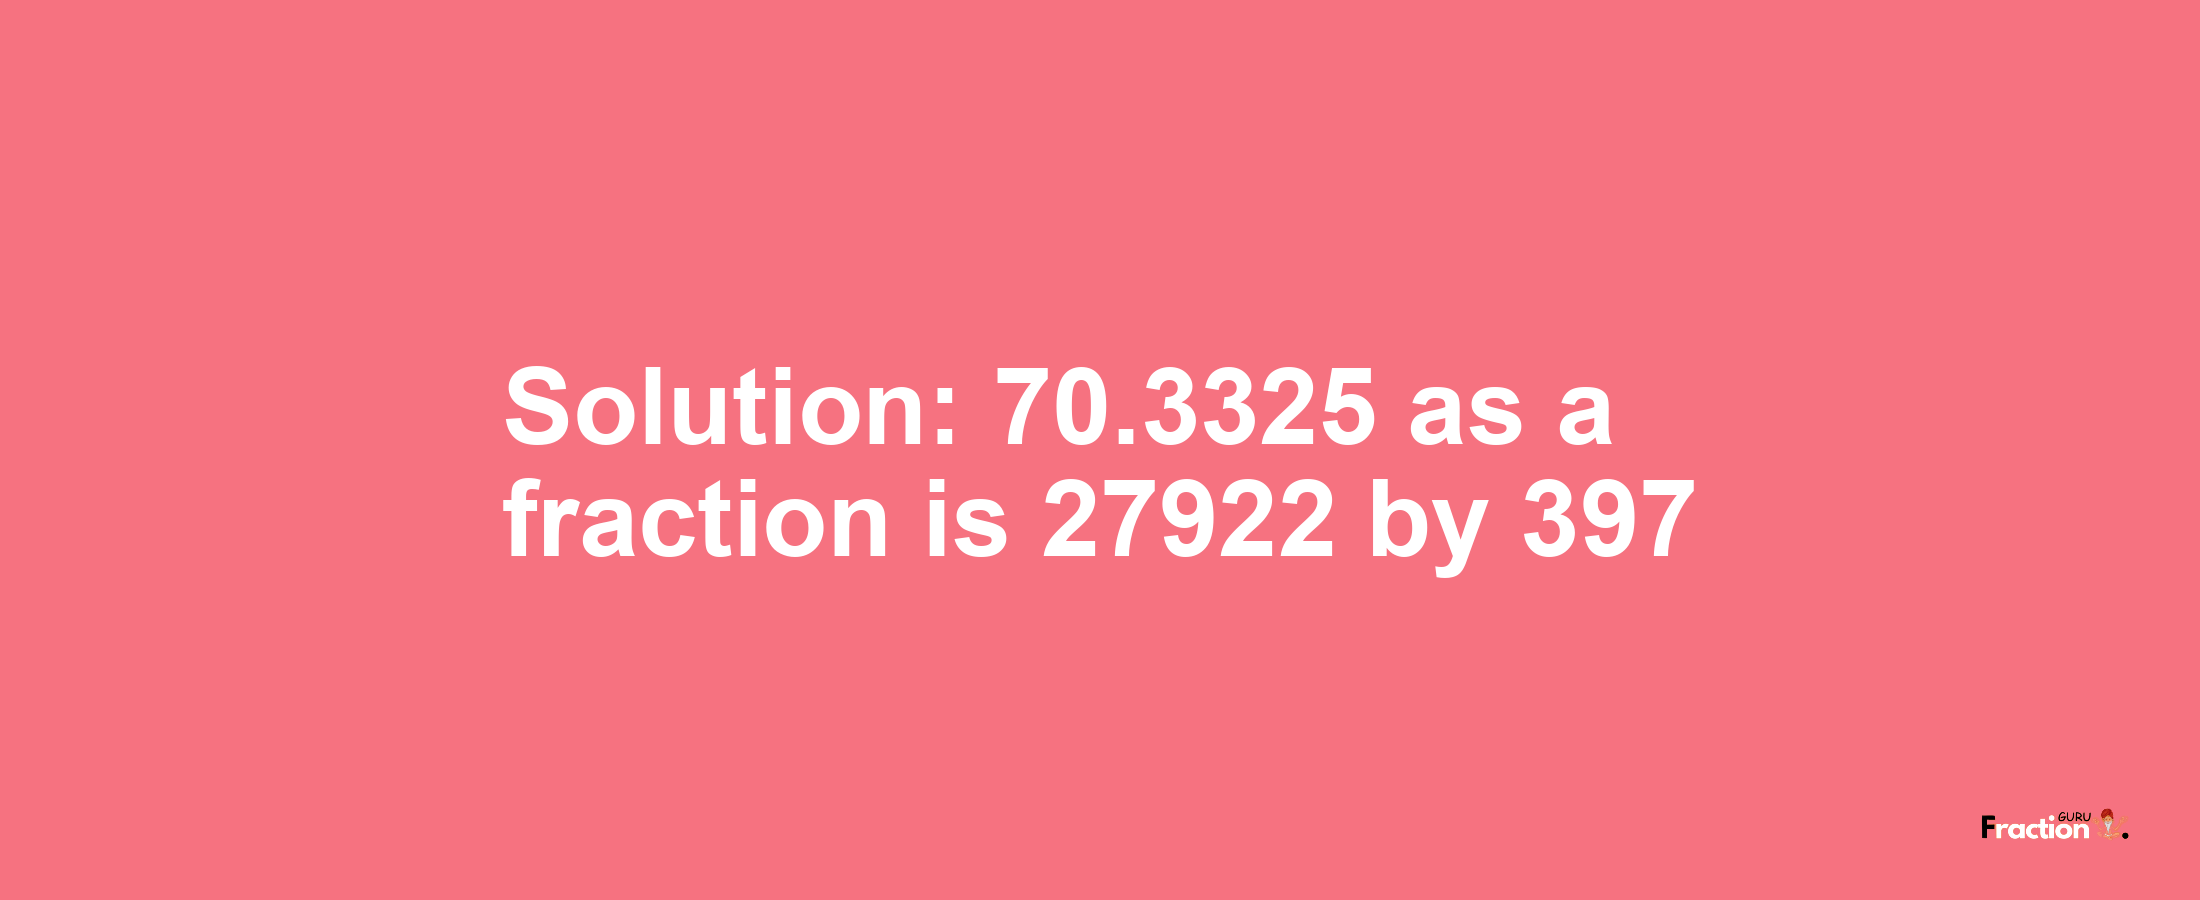 Solution:70.3325 as a fraction is 27922/397